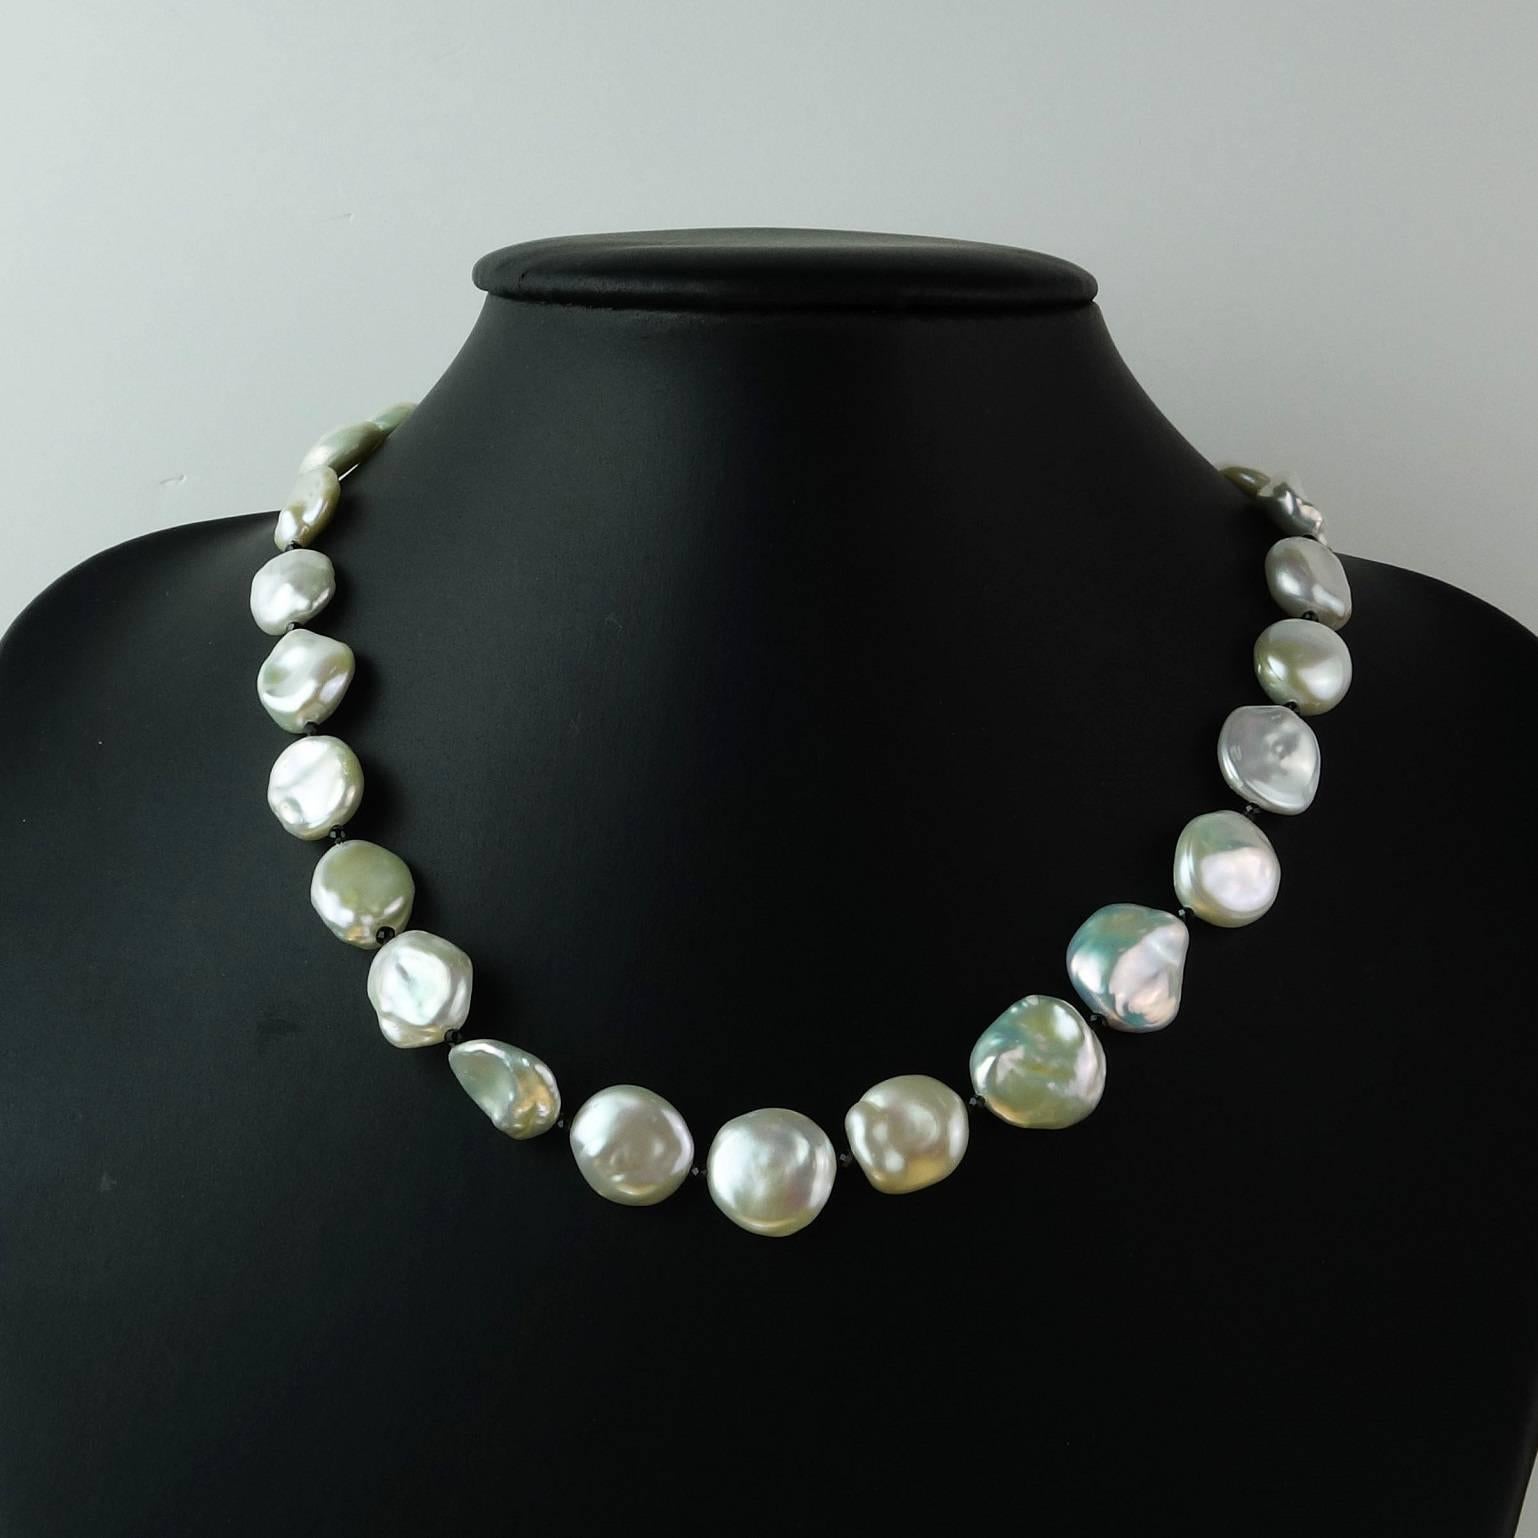 White Iridescent Freshwater Pearls with Black Spinel Accents Necklace 3